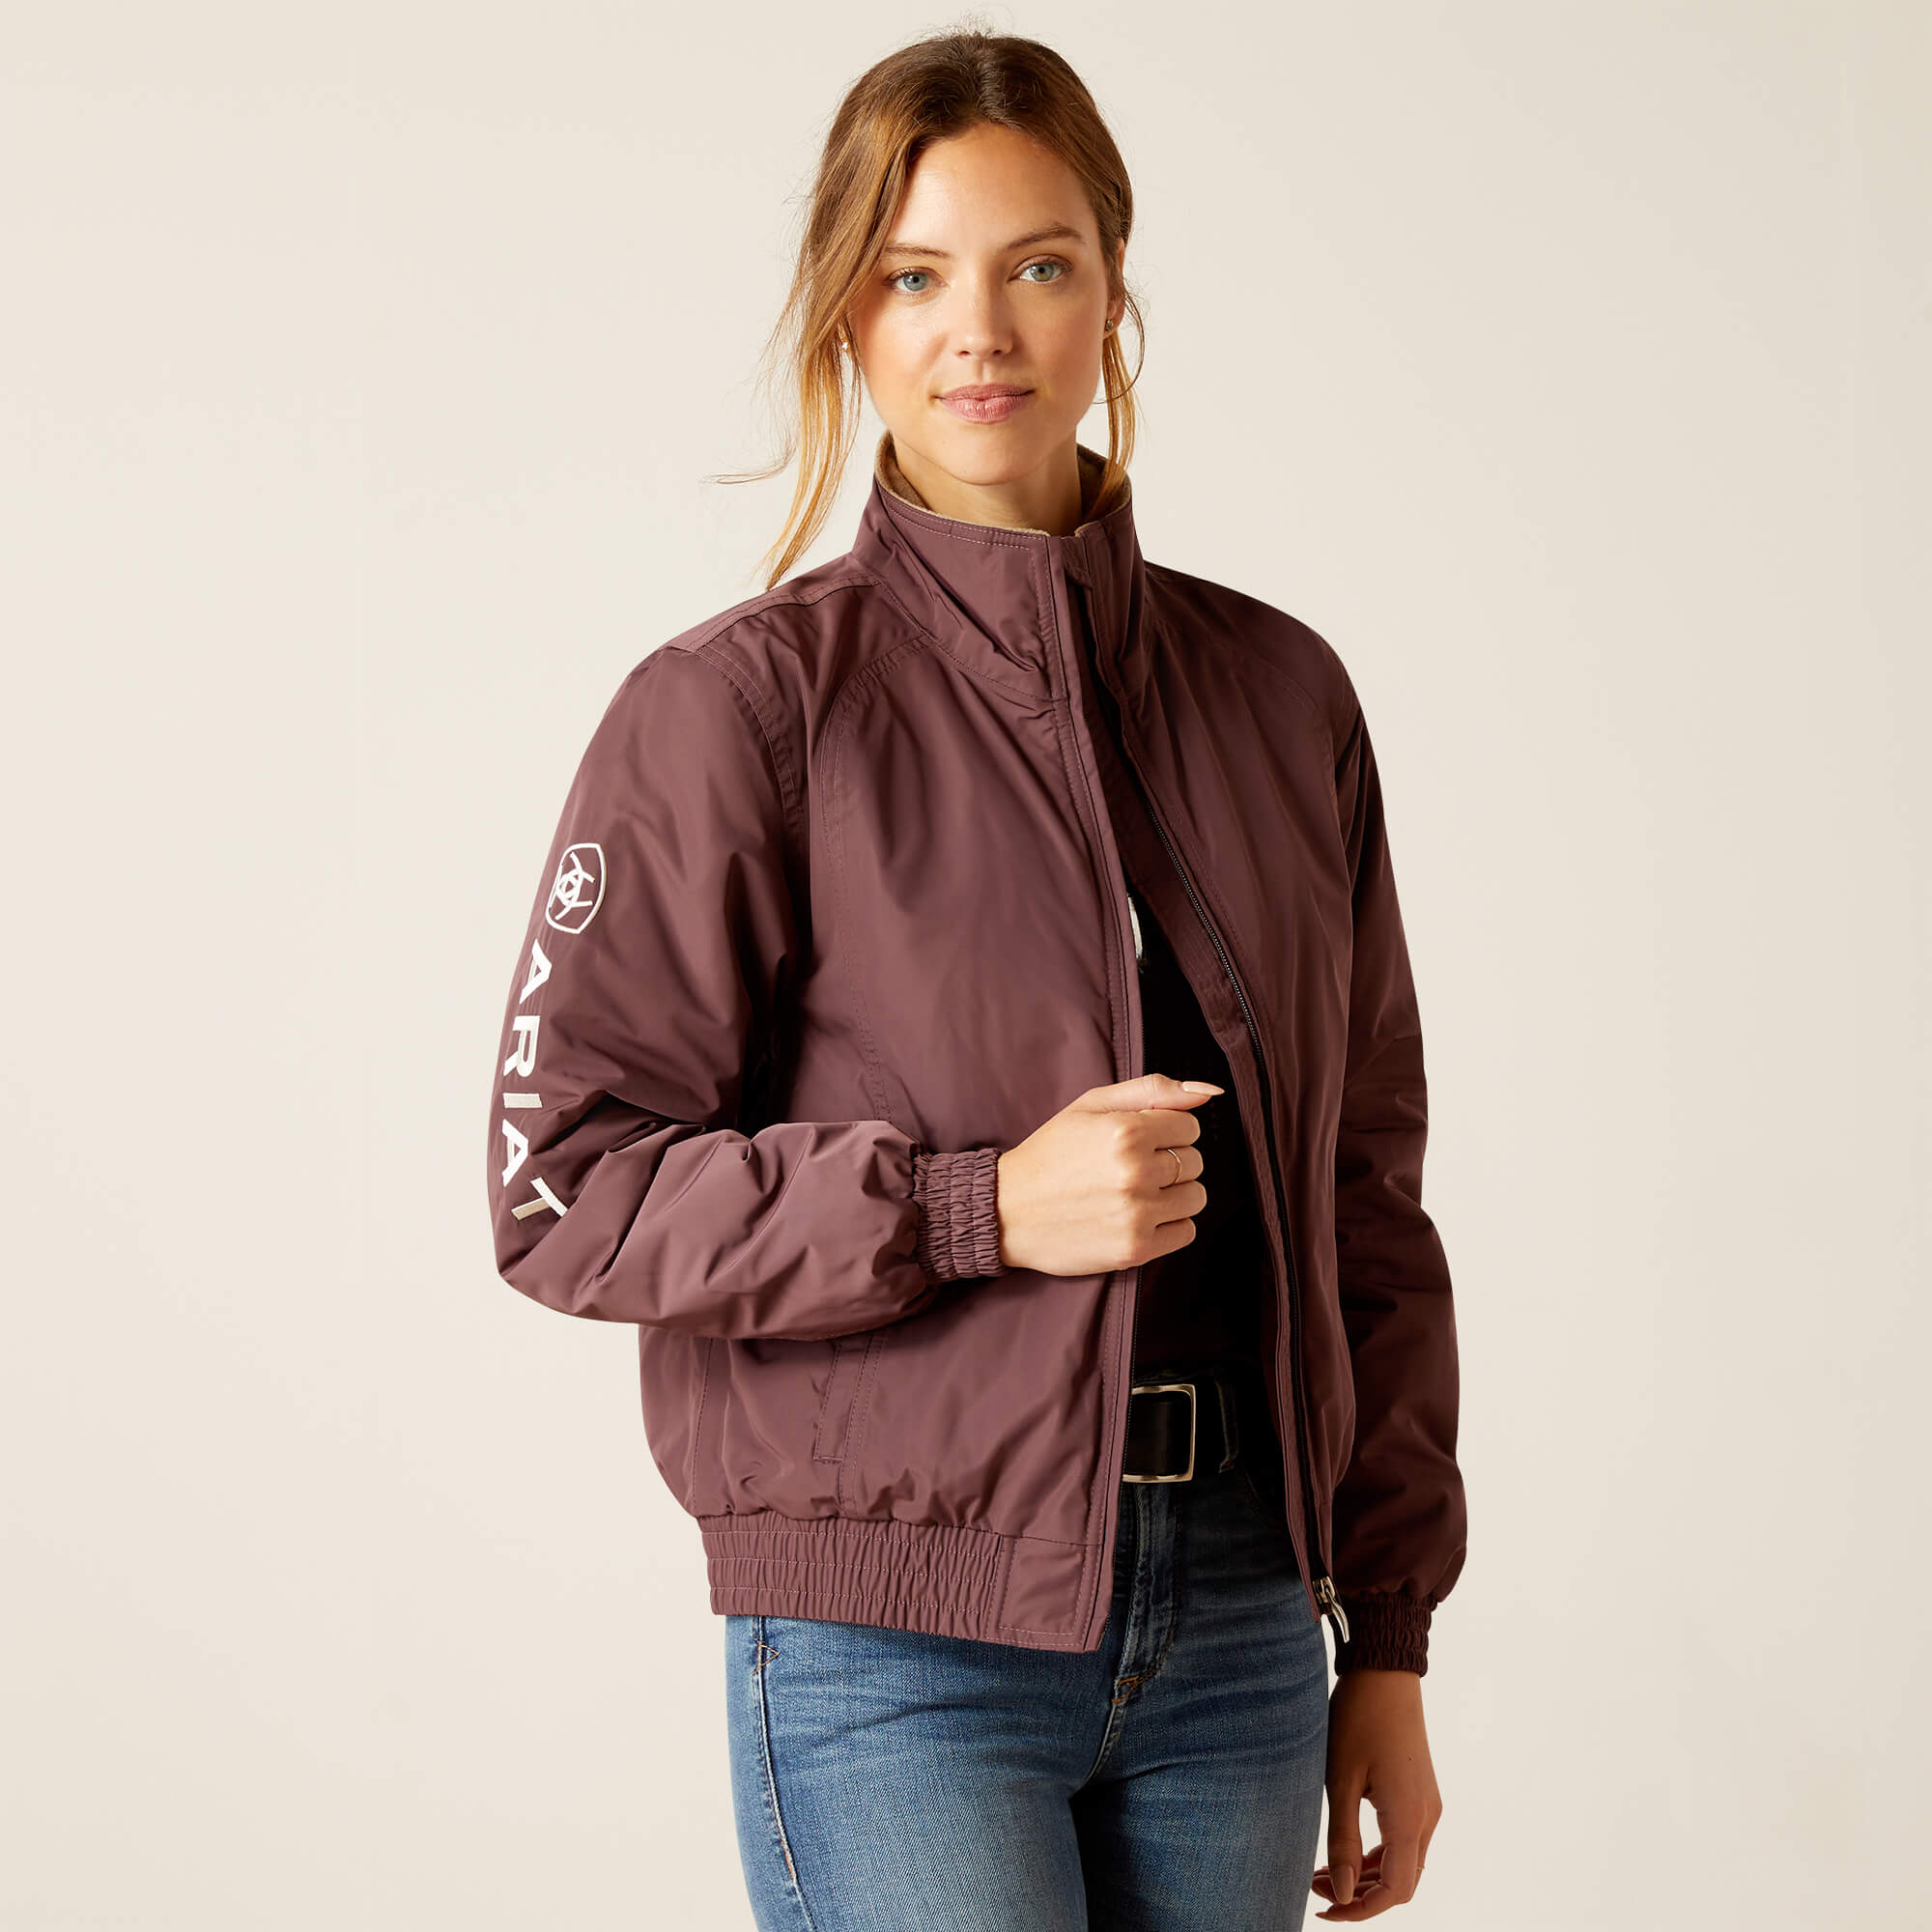 Ariat Women's Stable Insulated Jacket